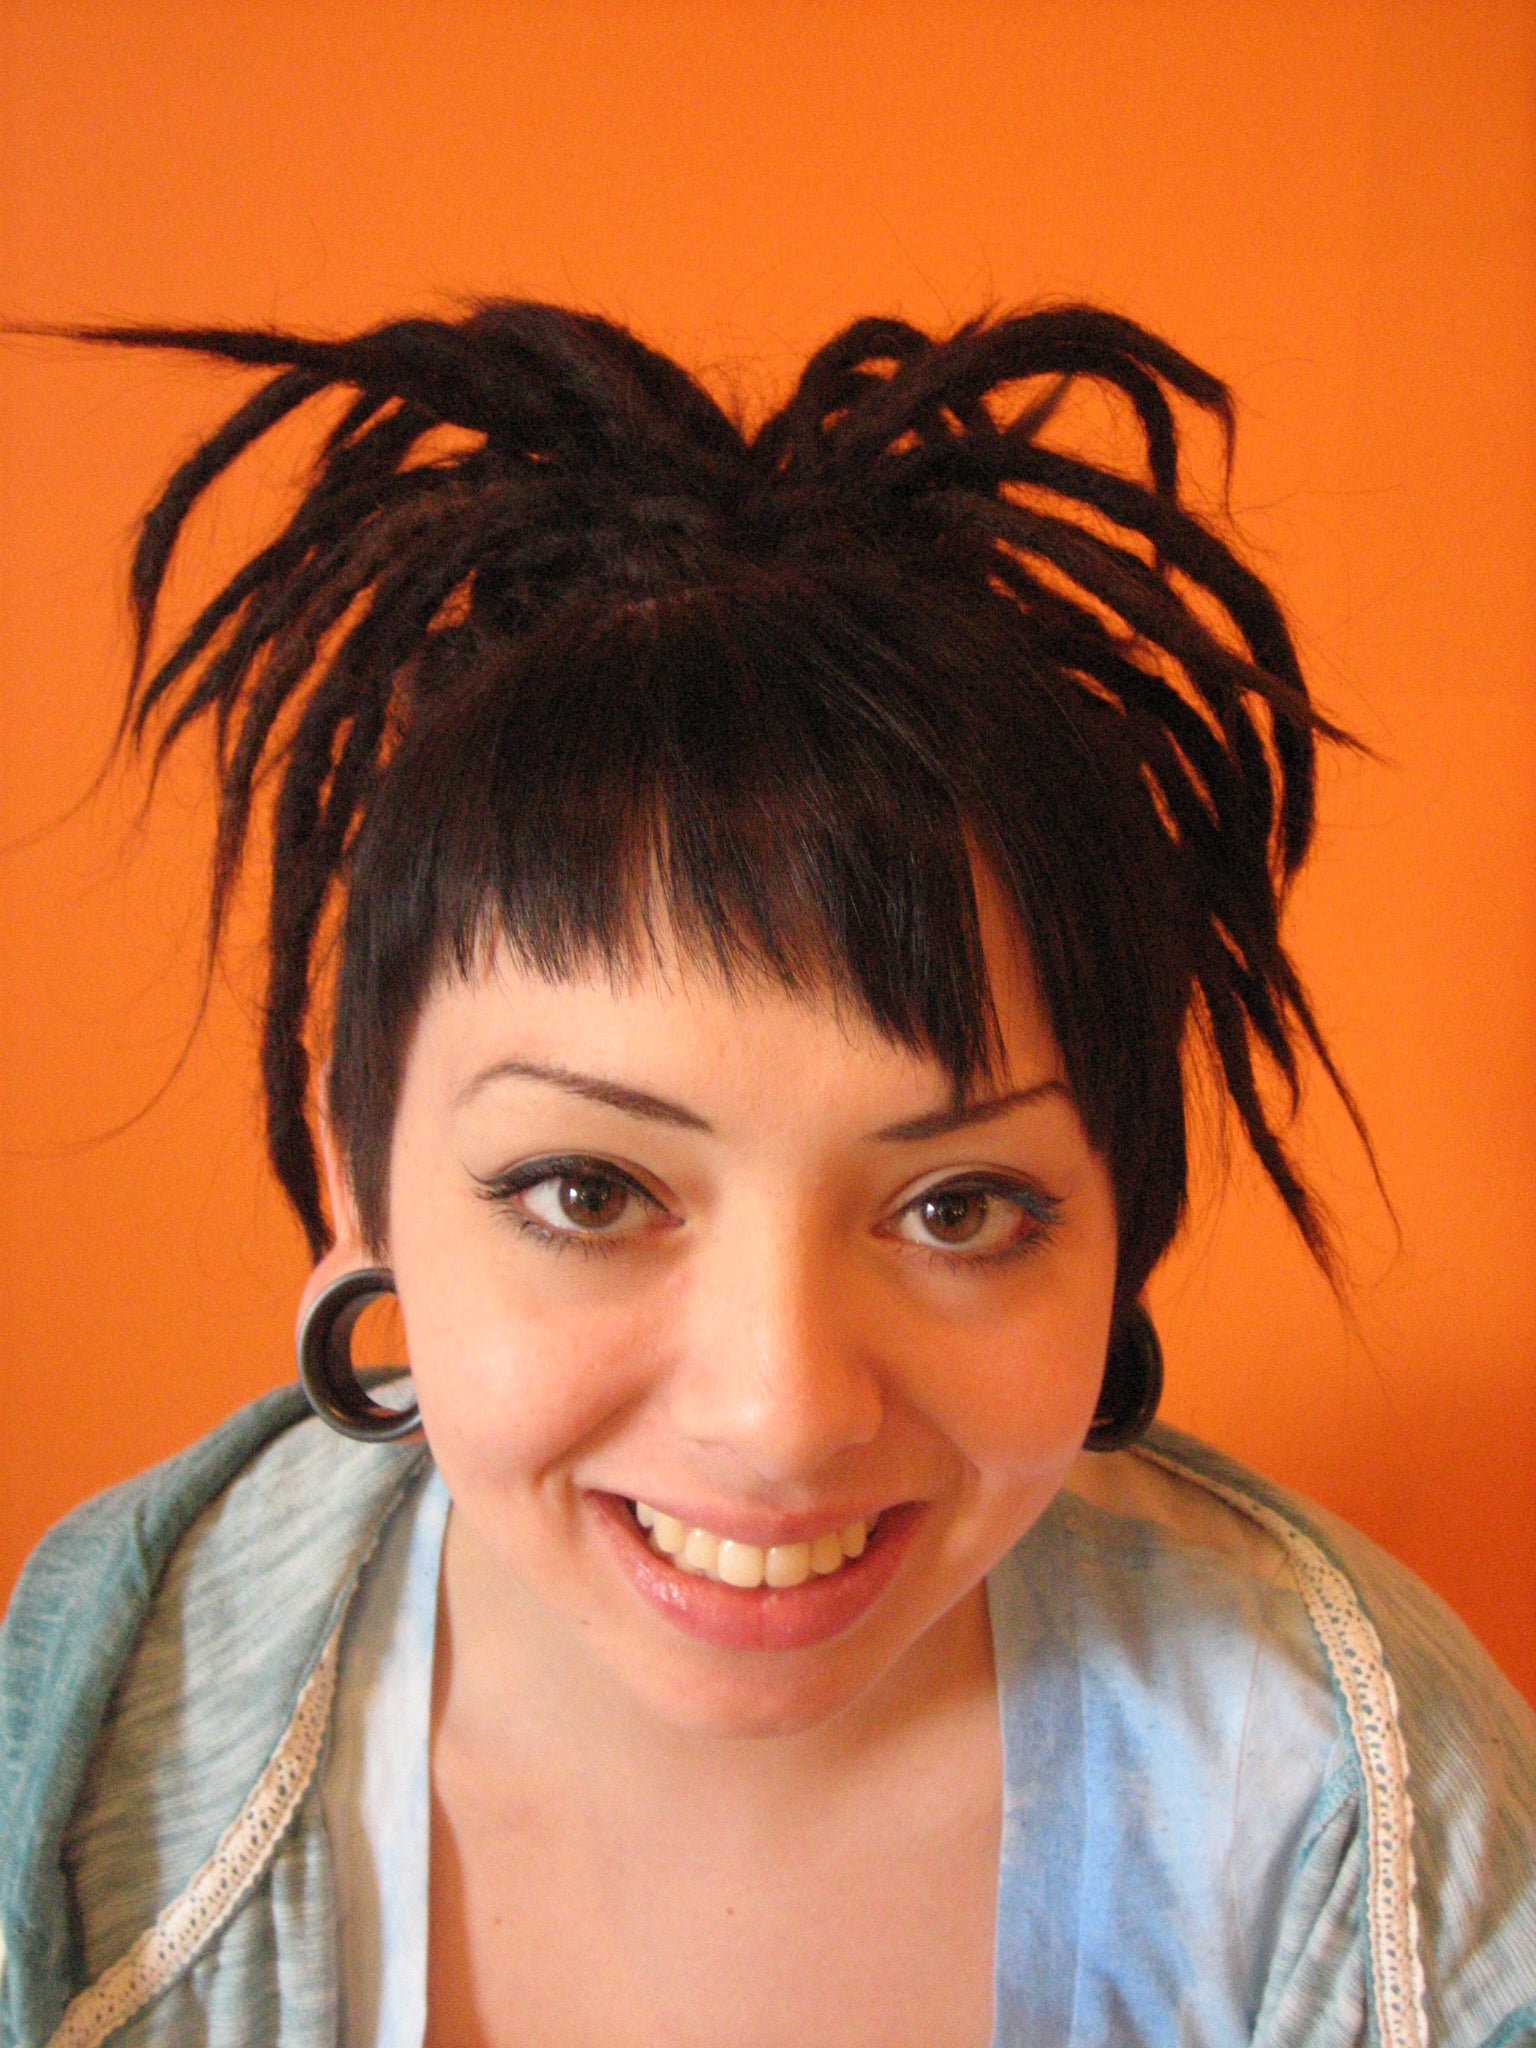 smiling woman with large earring flesh tunnels and dark brown dreadlocks against an orange background with bangs and knotted dreadlock do